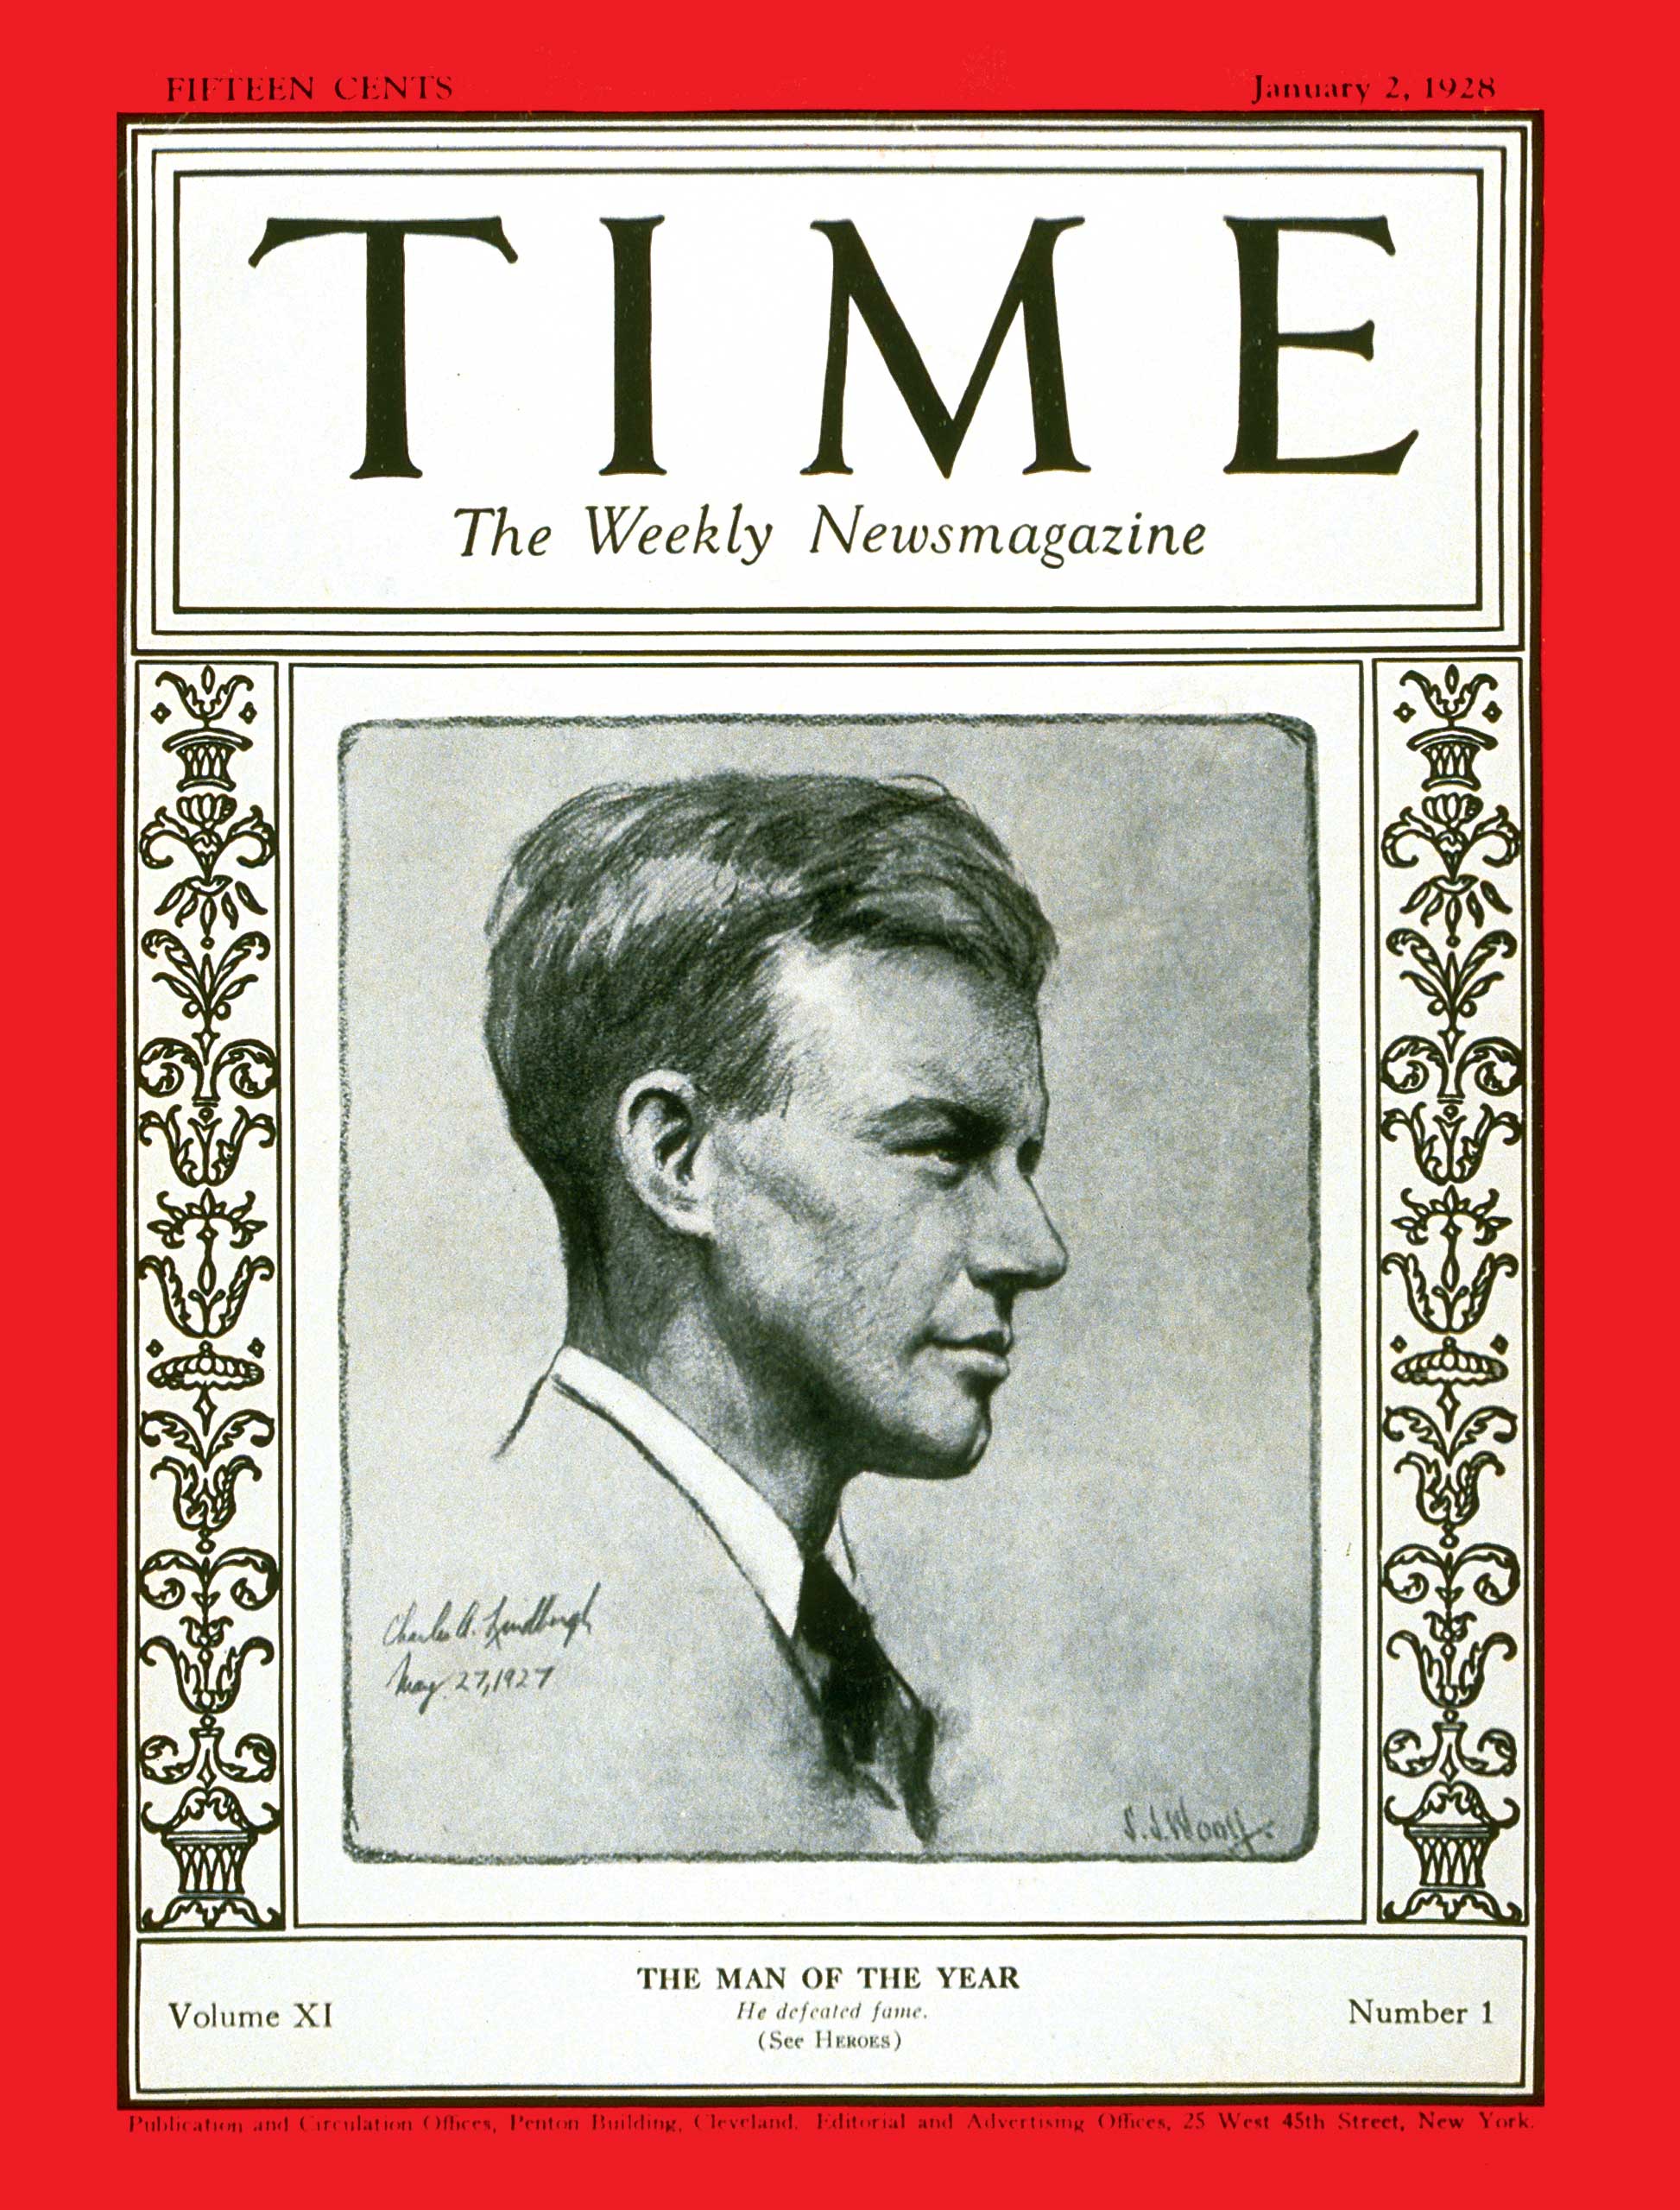 TIME Man of the Year 1927: Charles Lindbergh